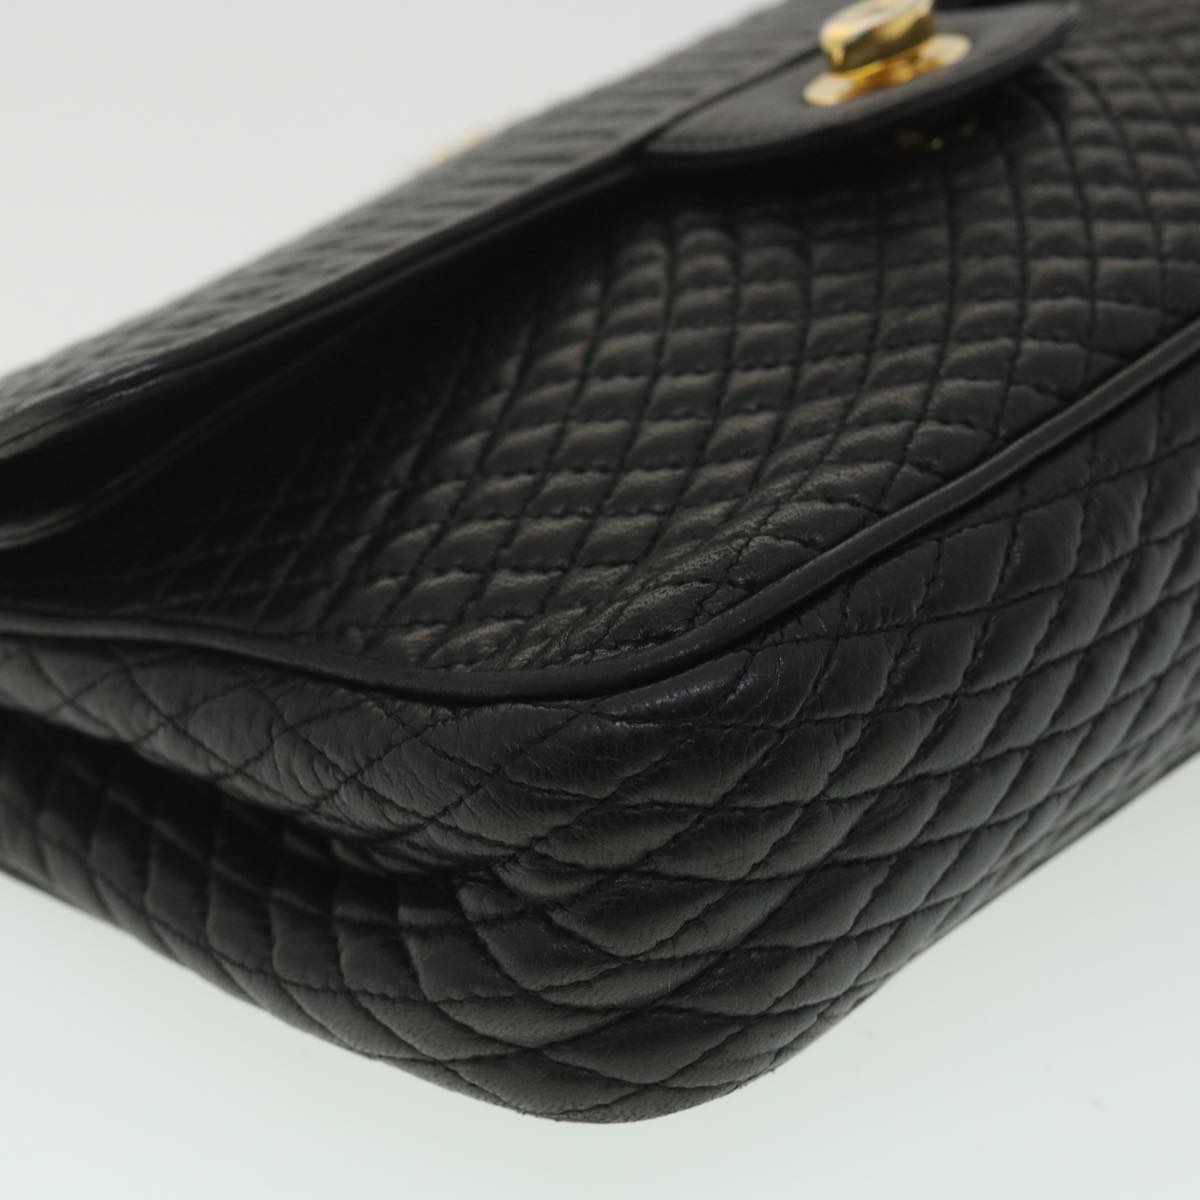 BALLY Quilted Chain Shoulder Bag Leather Black Auth yk5704